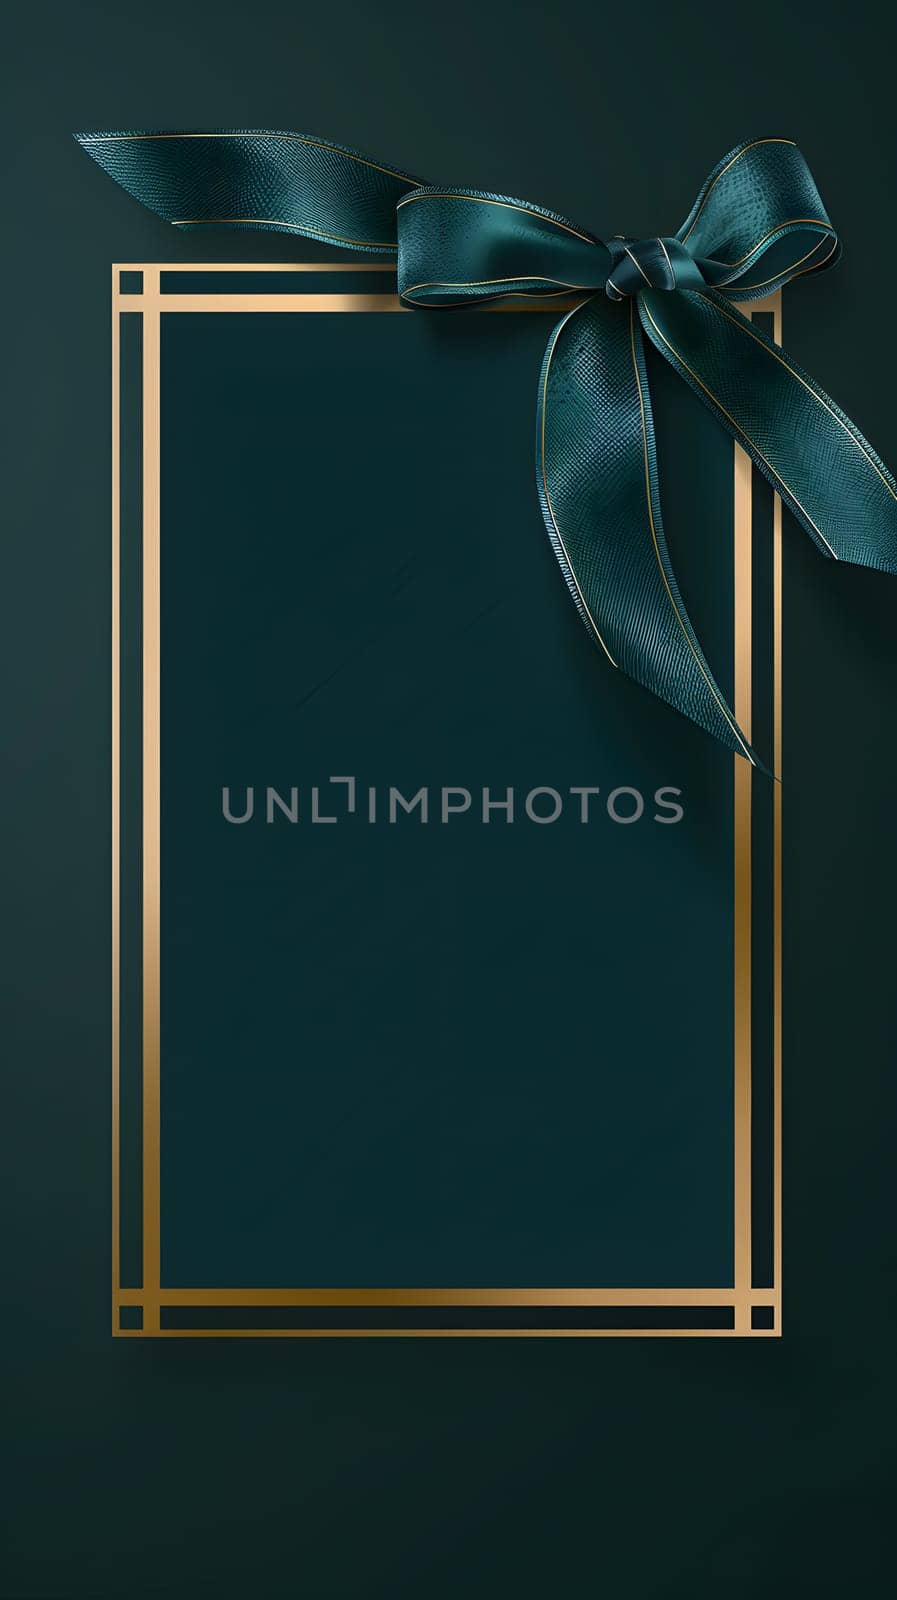 A rectangle picture frame made of gold with a transparent glass, adorned with an electric blue ribbon bow, on a dark green background symbolizing fashion and elegance